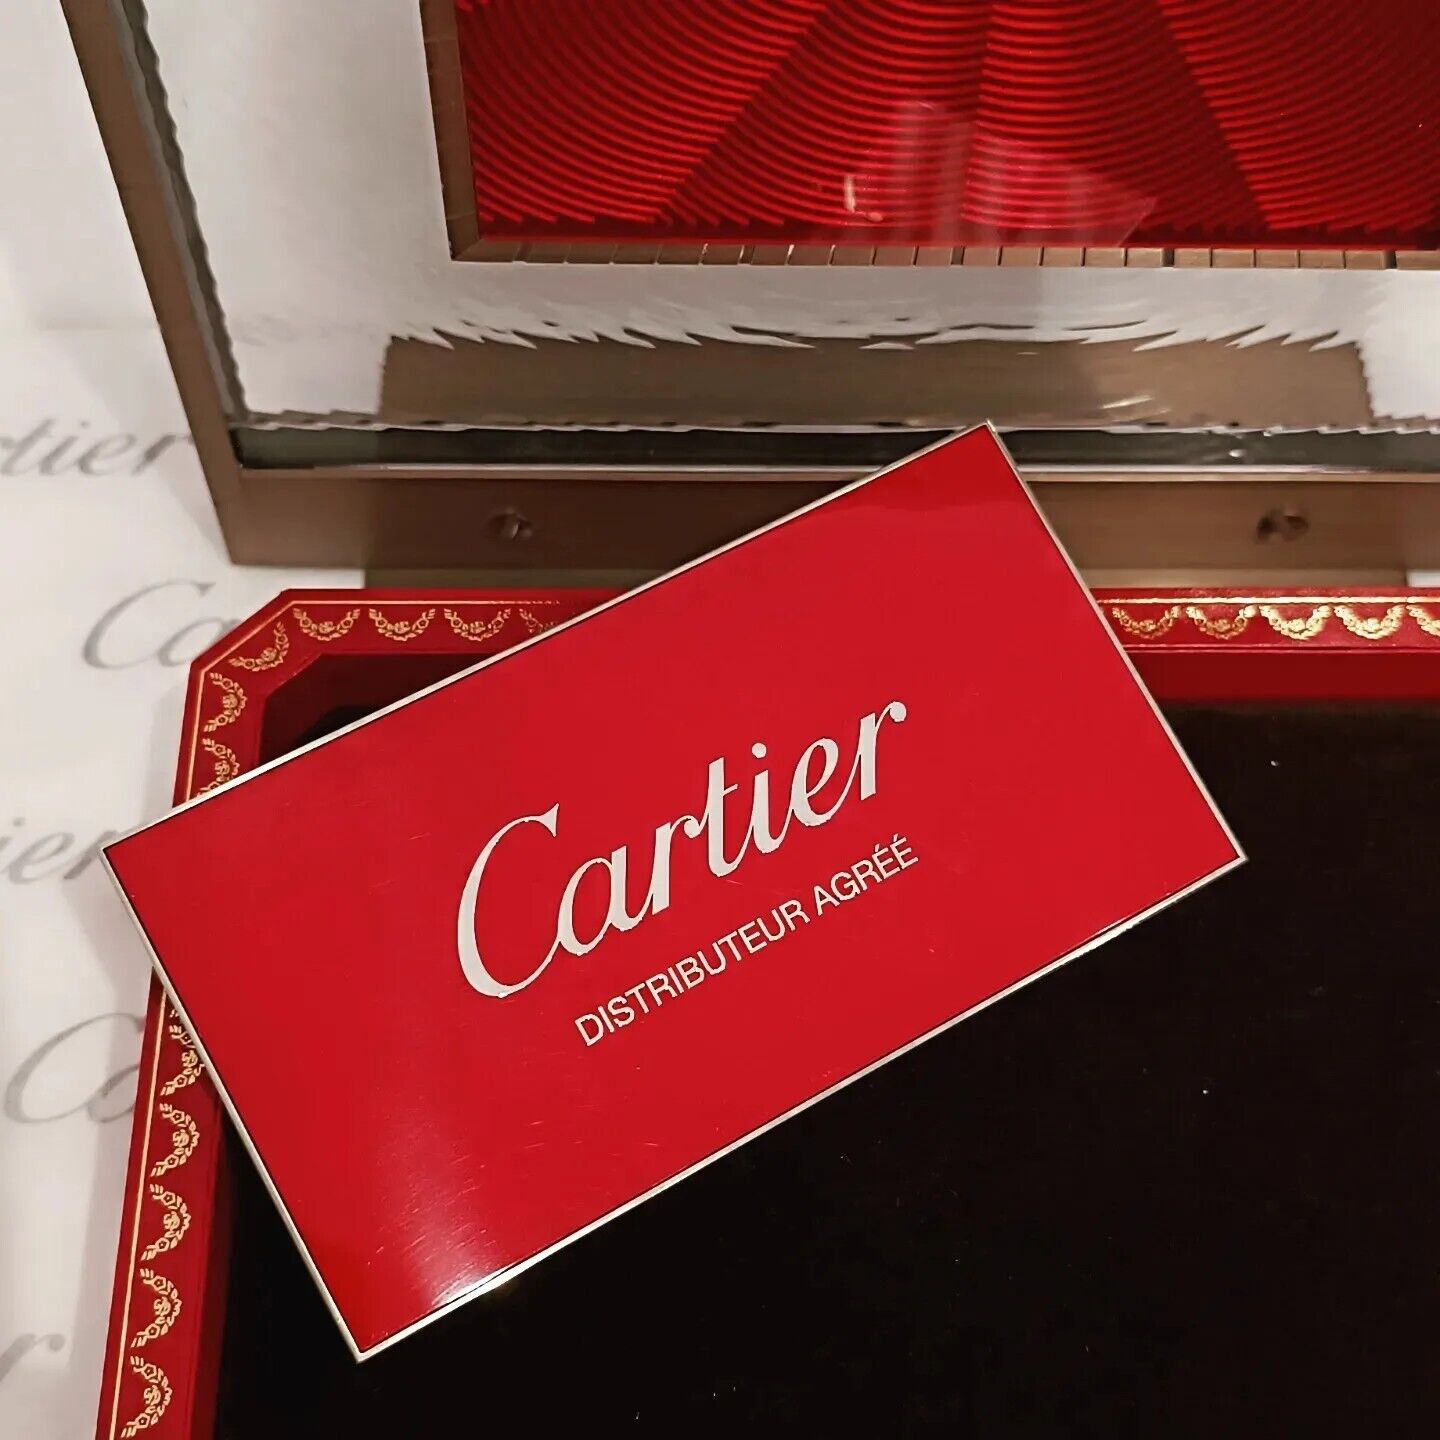 Cartier lacquered plate, vintage, Cartier must, display, tray